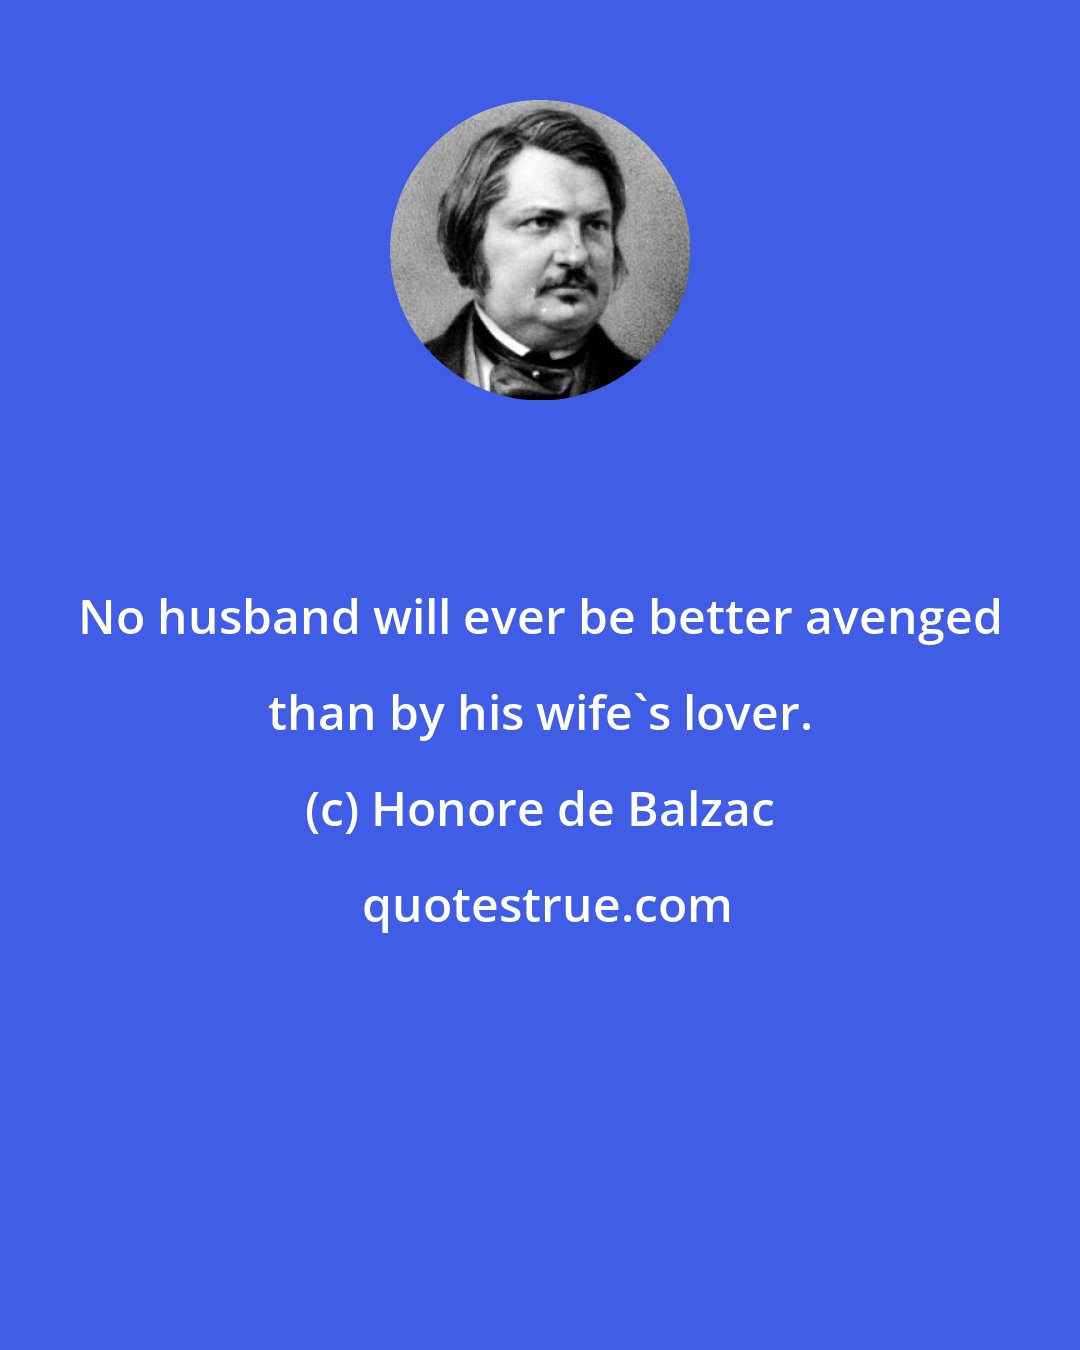 Honore de Balzac: No husband will ever be better avenged than by his wife's lover.